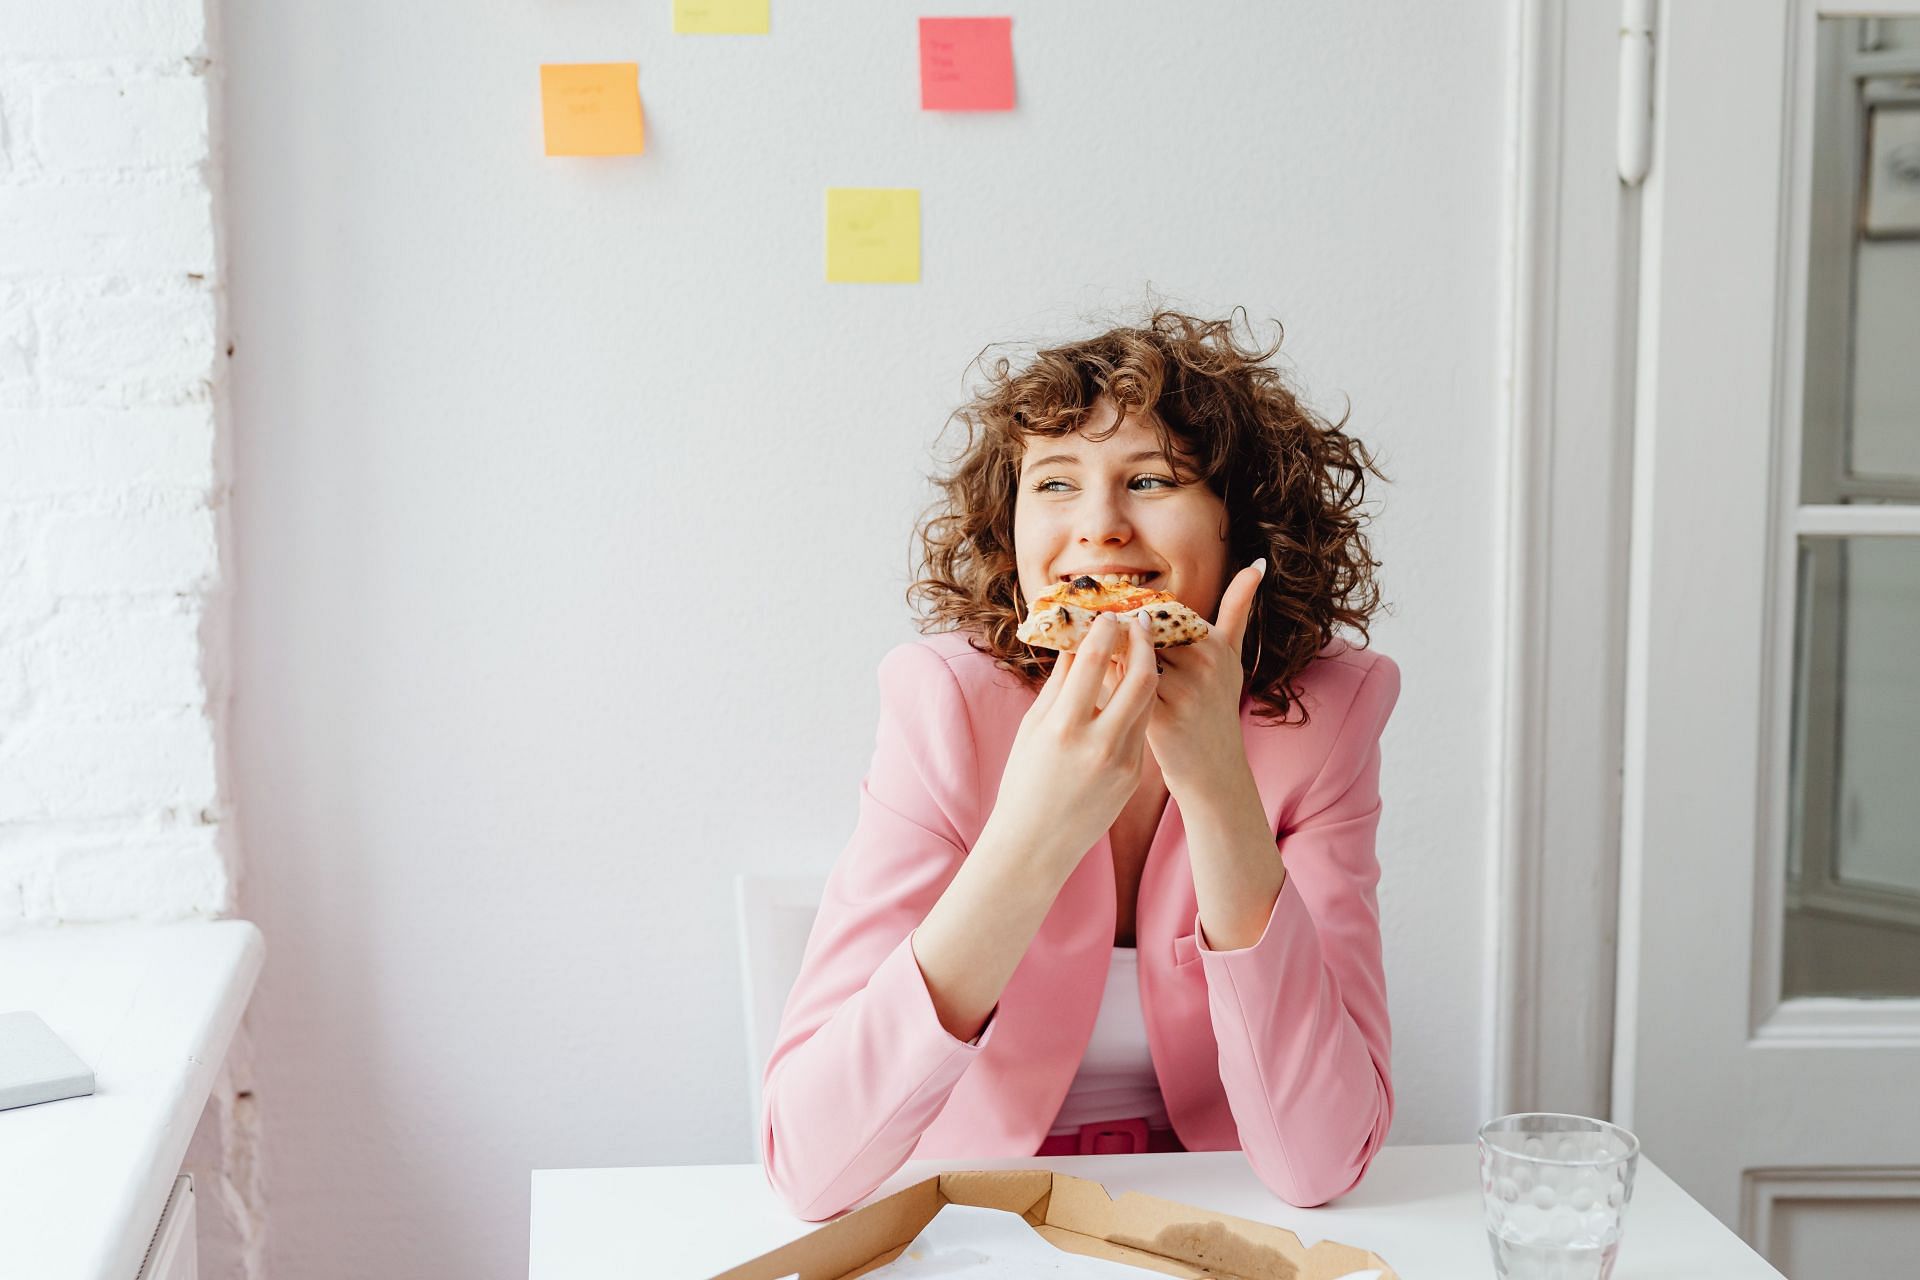 Rejecting diet mentality is one of the core principles of intuitive eating. (Image via Pexels / Karolina Grabowska)